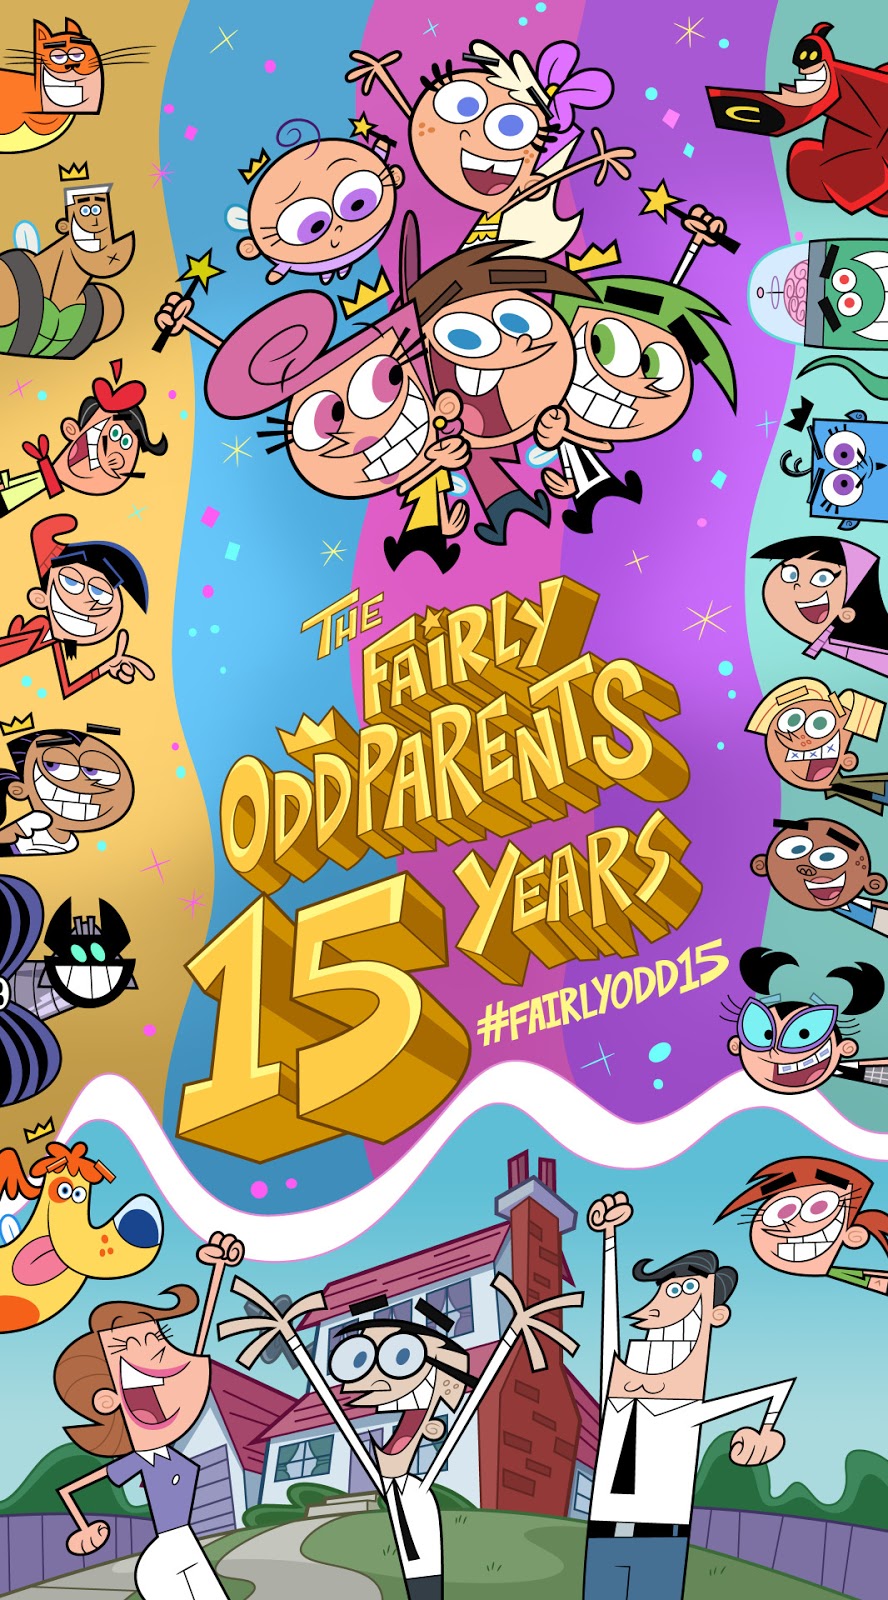 characters in fairly odd parents